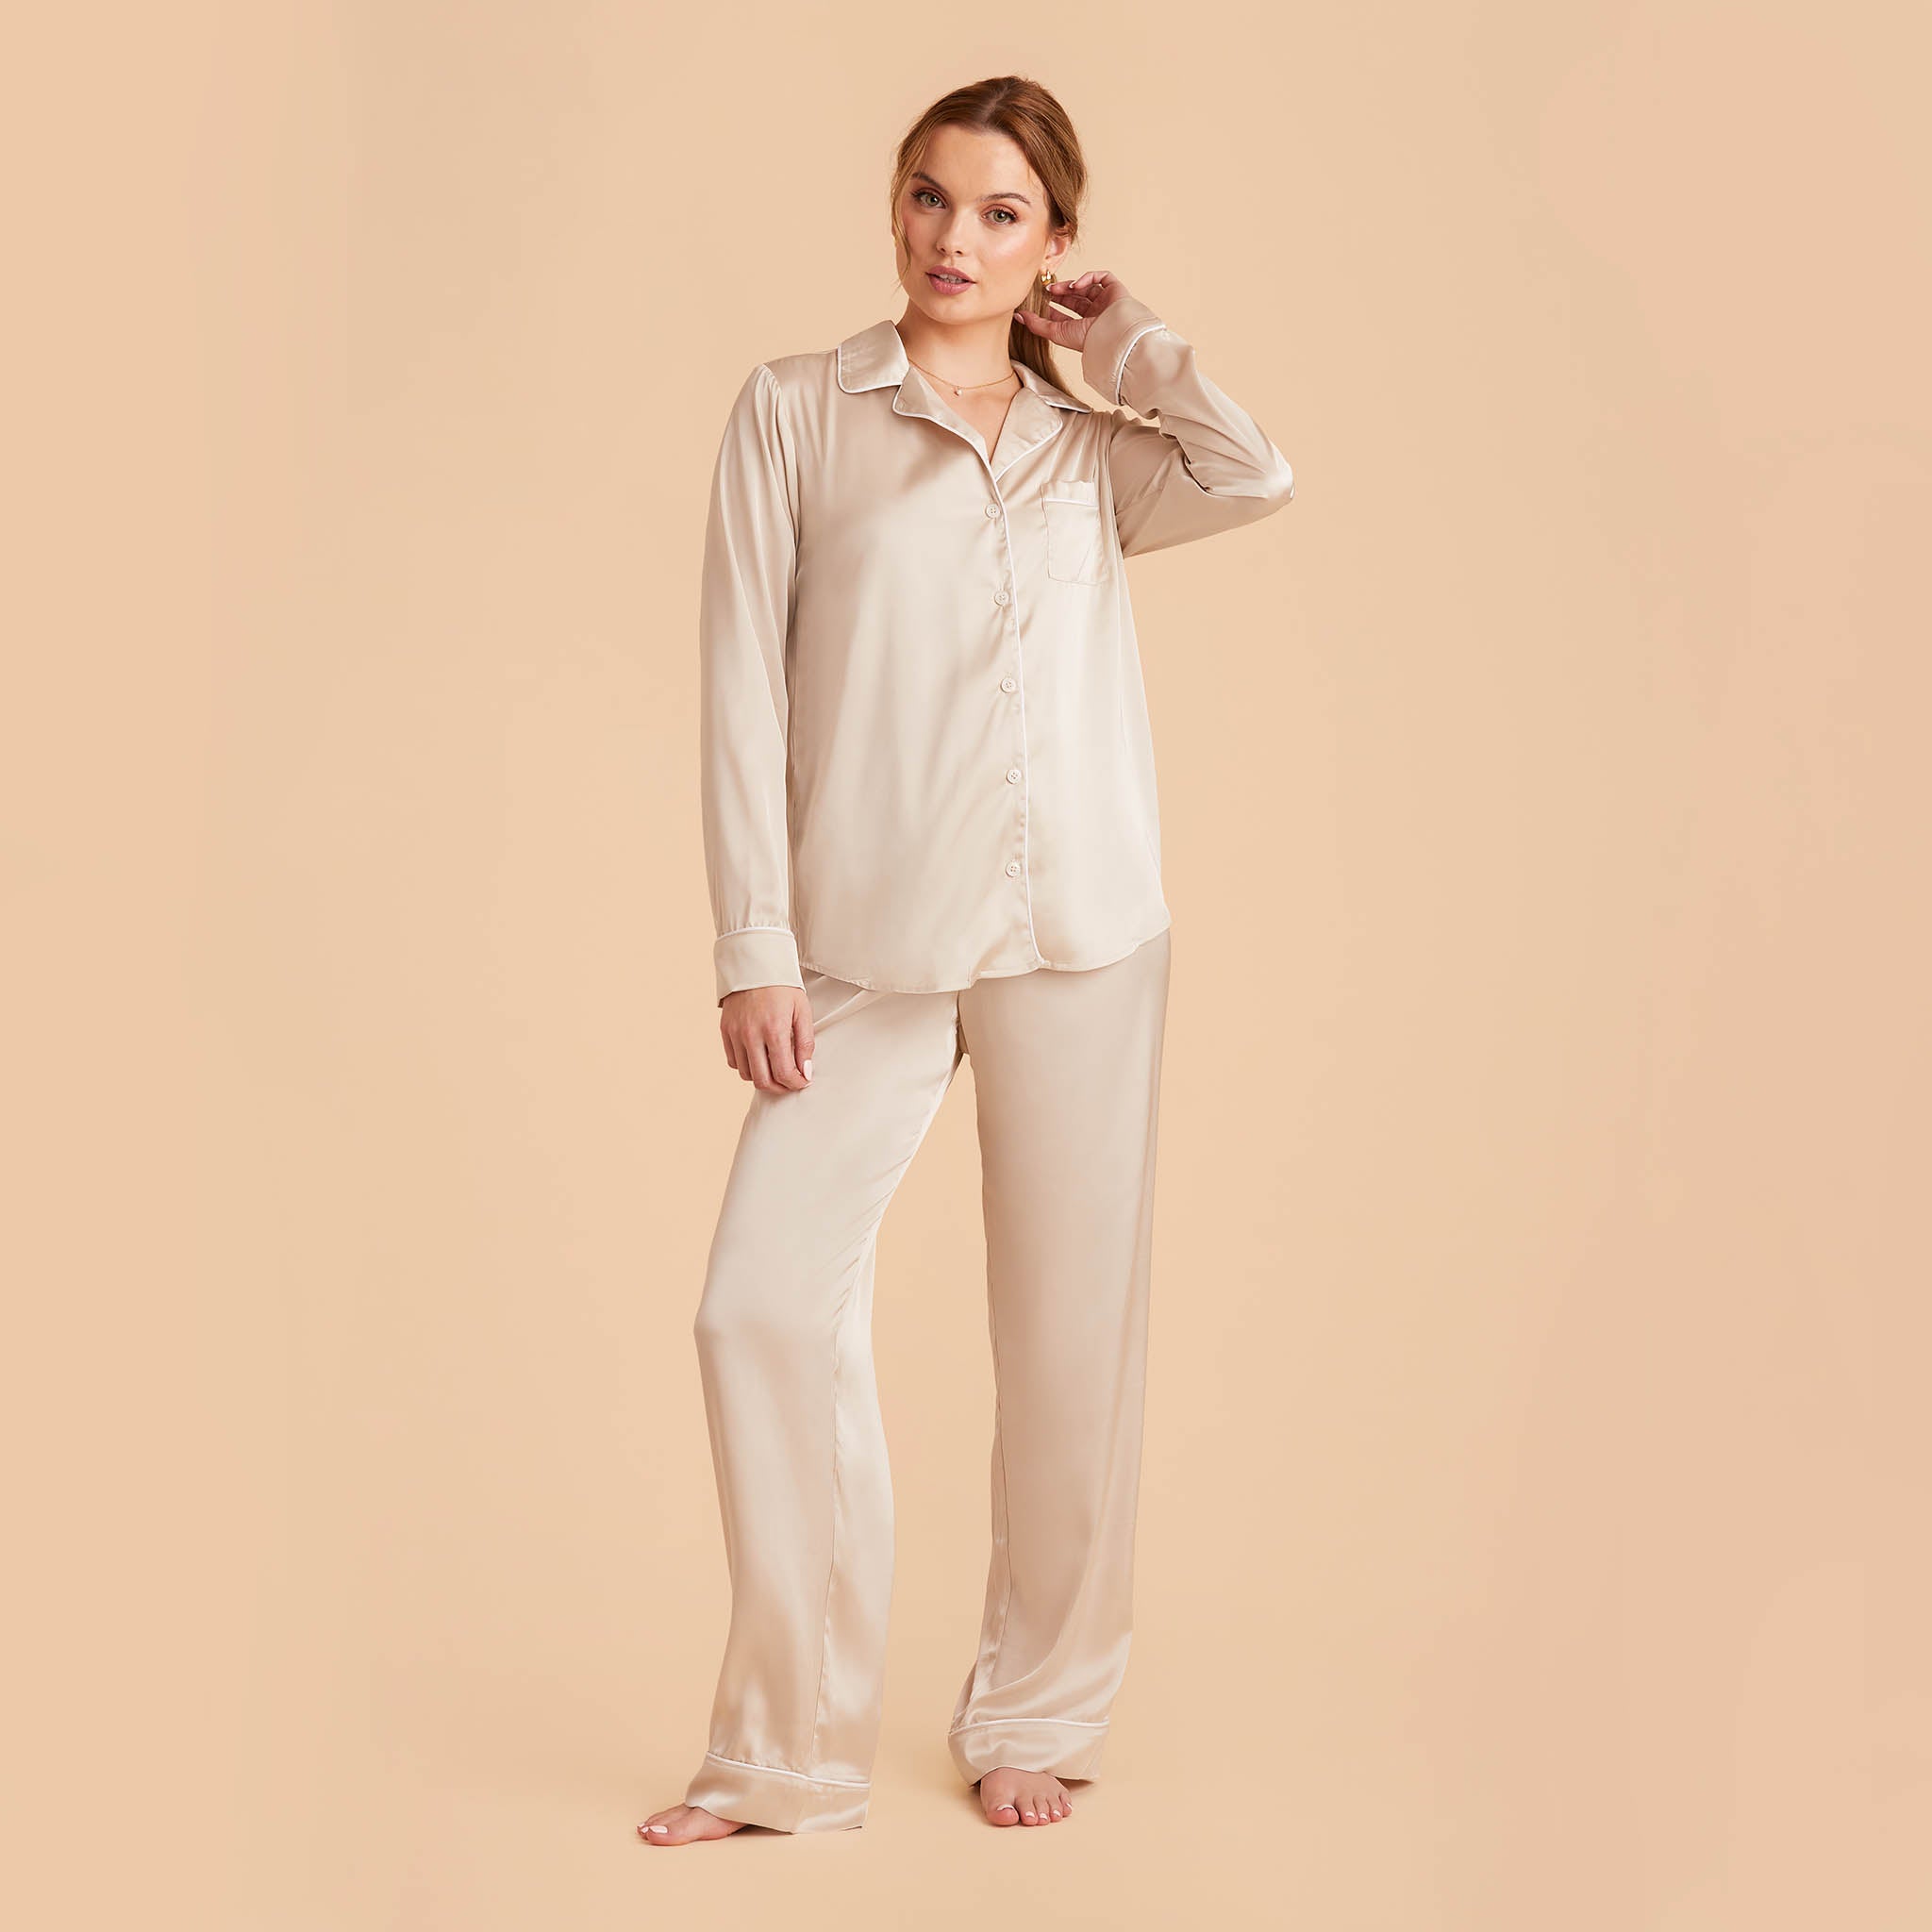 Jonny Satin Long Sleeve Pajama Top With White Piping in champagne, front view